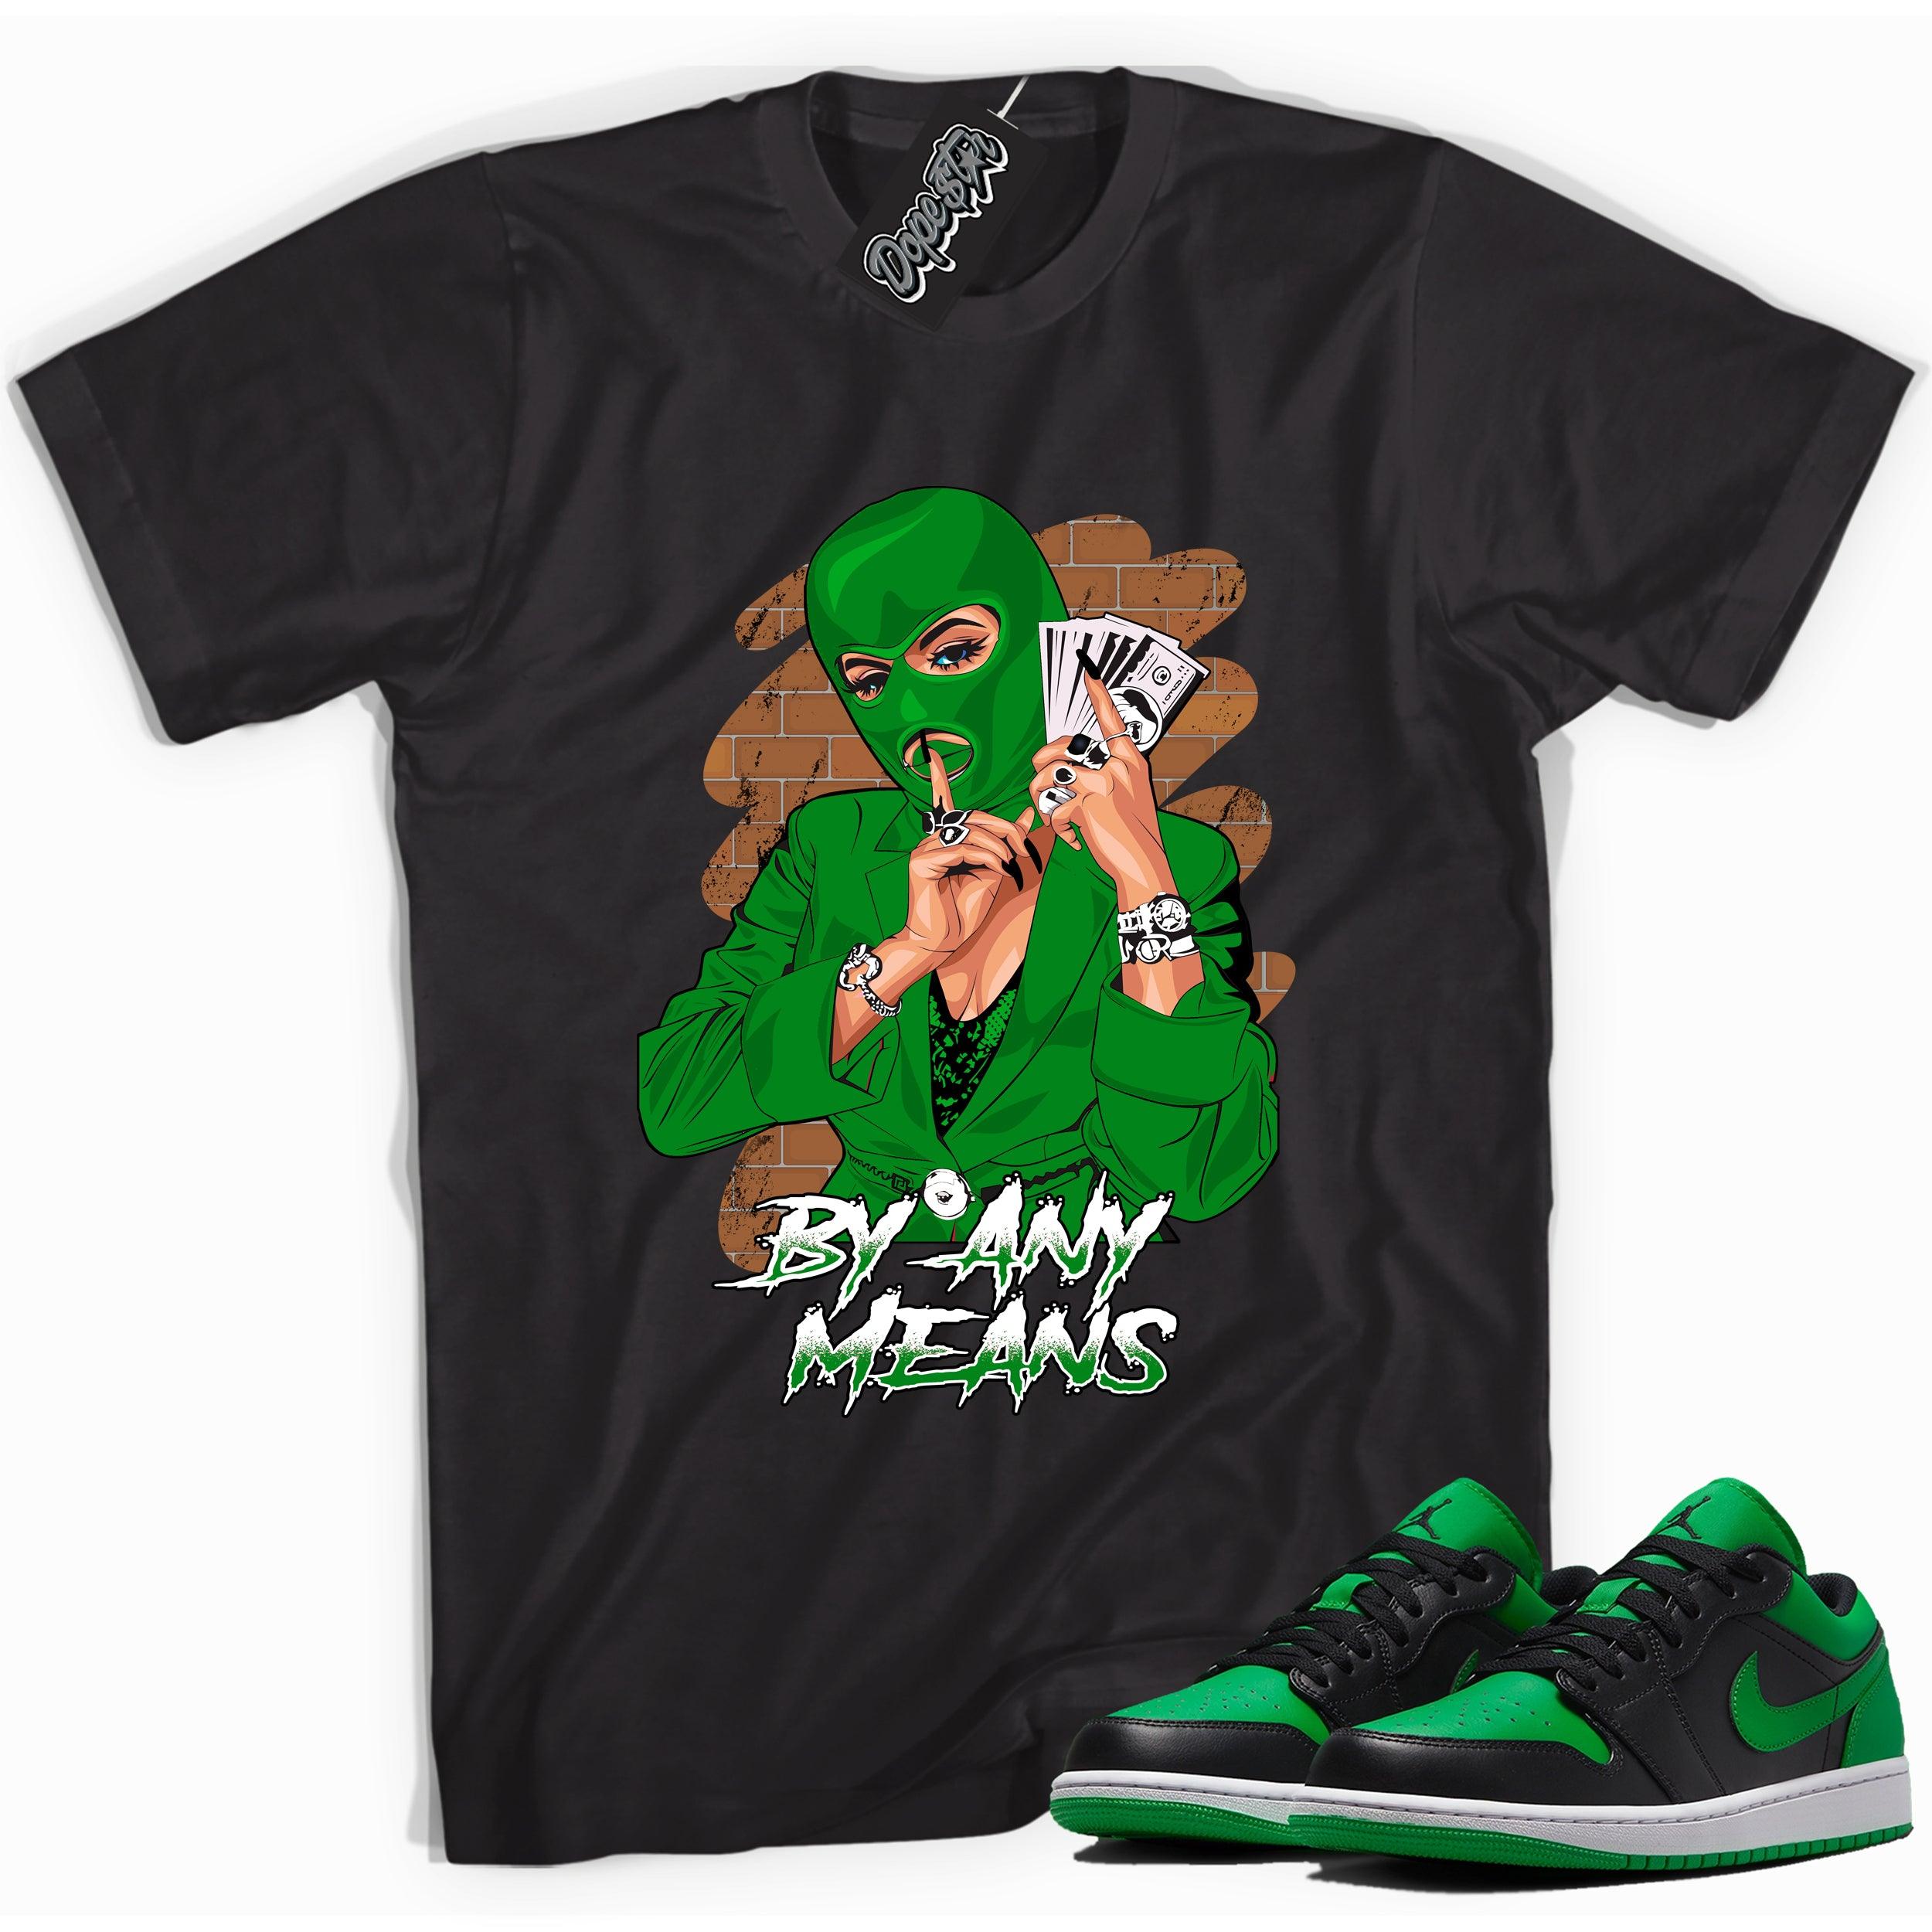 Cool black graphic tee with 'by any means' print, that perfectly matches Air Jordan 1 Low Lucky Green sneakers